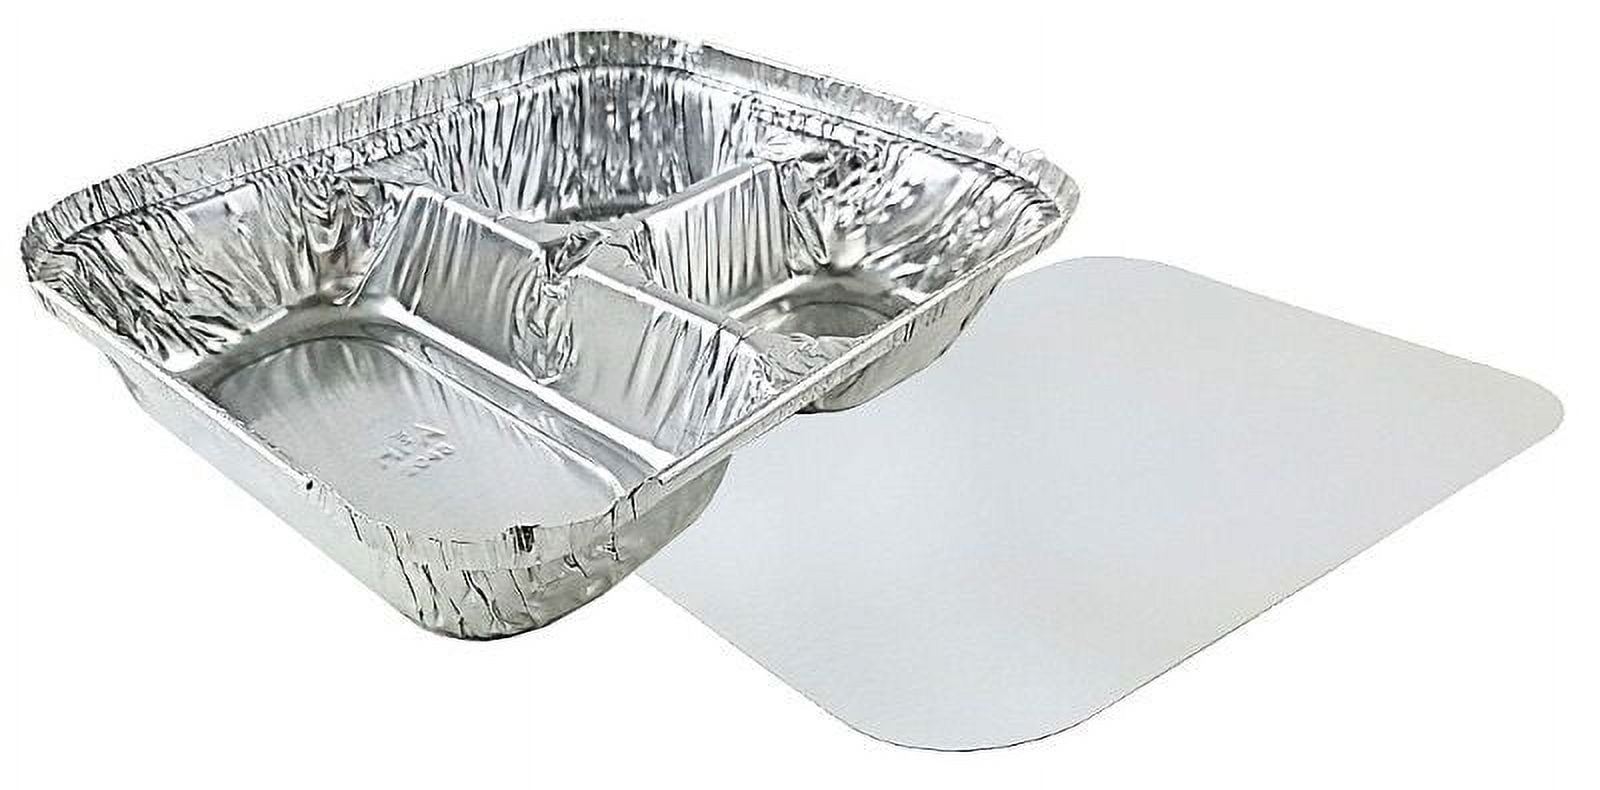 Disposable Aluminum Dinner Tray with Paper Lids 3 Compartment Foil Pan